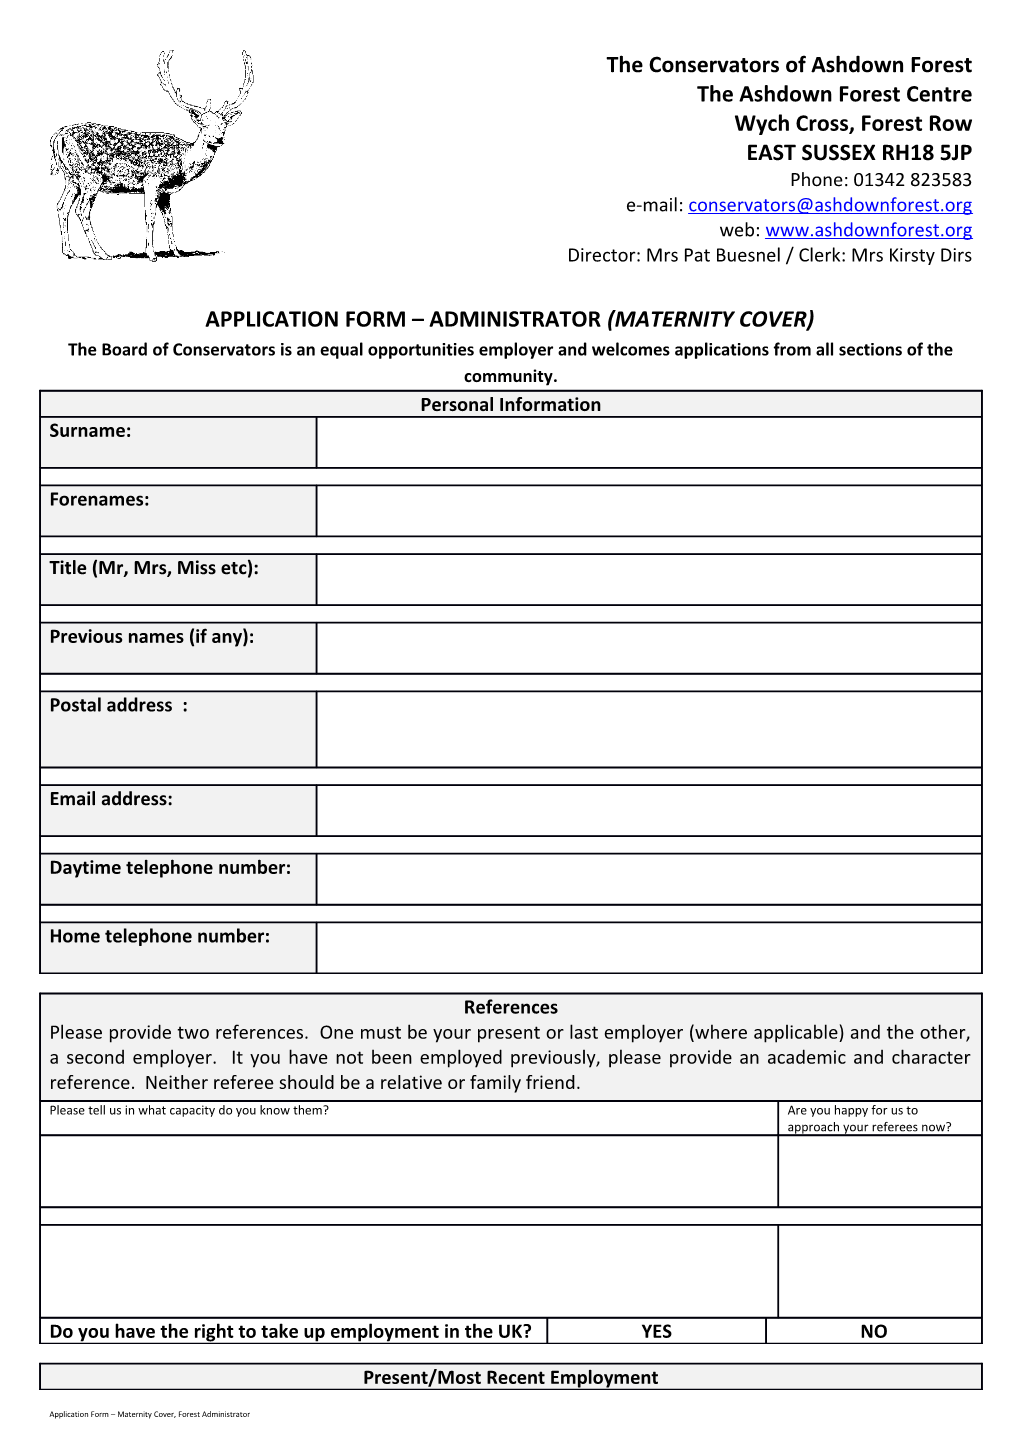 Application Form Administrator(Maternity Cover)